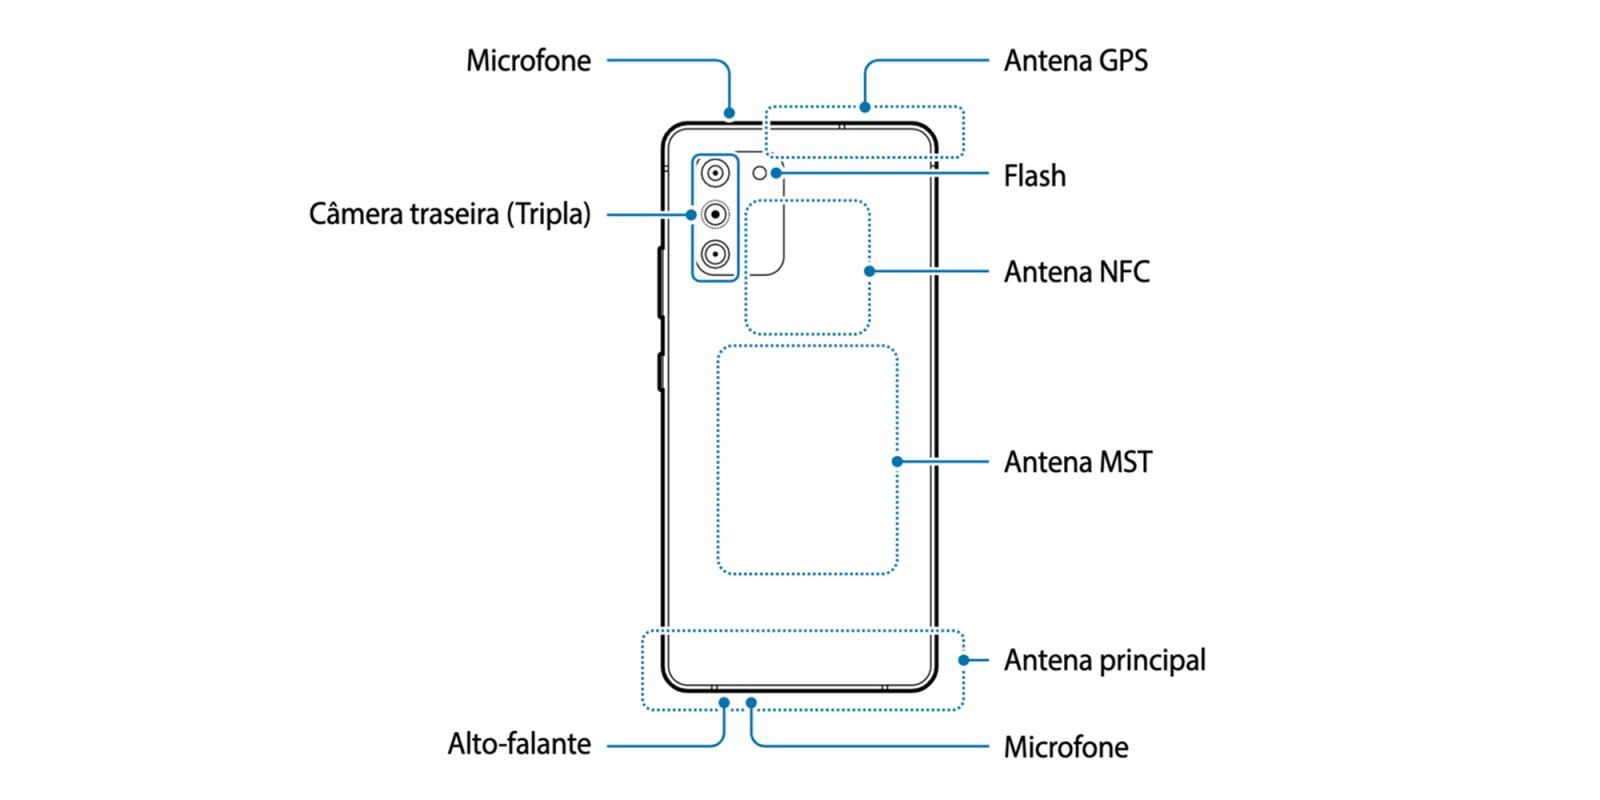 Galaxy S10 Lite user manual hints at key design changes - 9to5Google